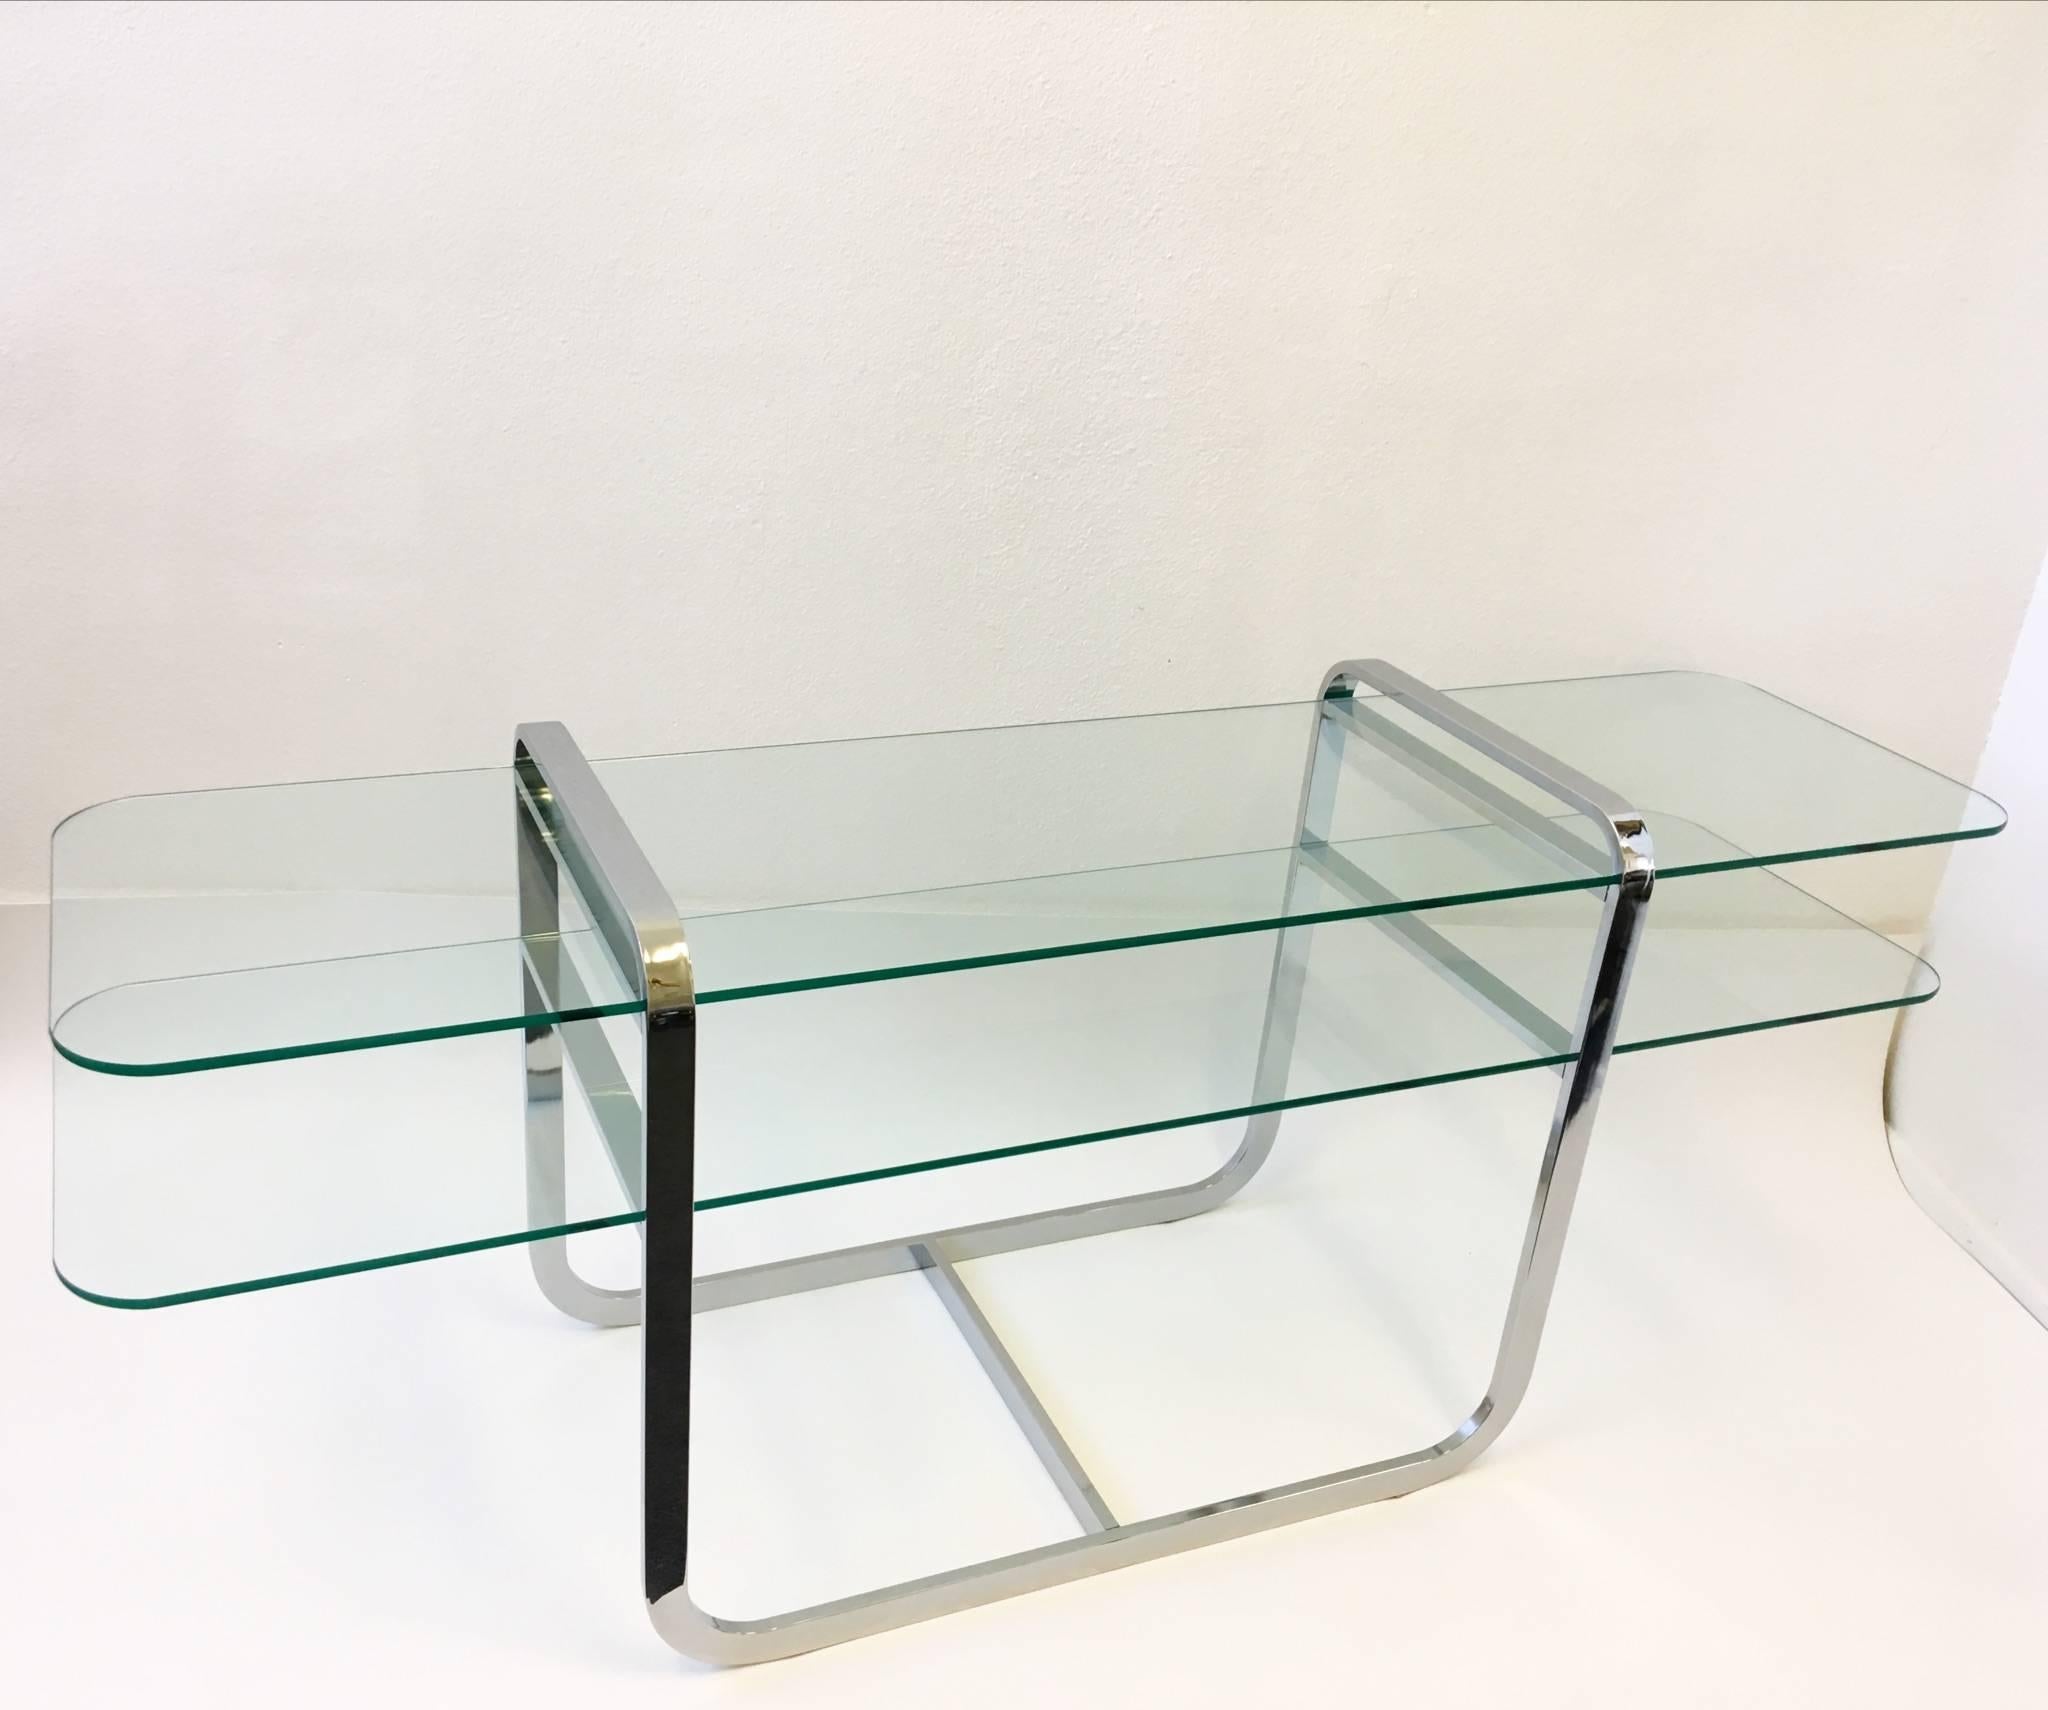 American Chrome and Glass Console Table and Pair of Ottomans by DIA